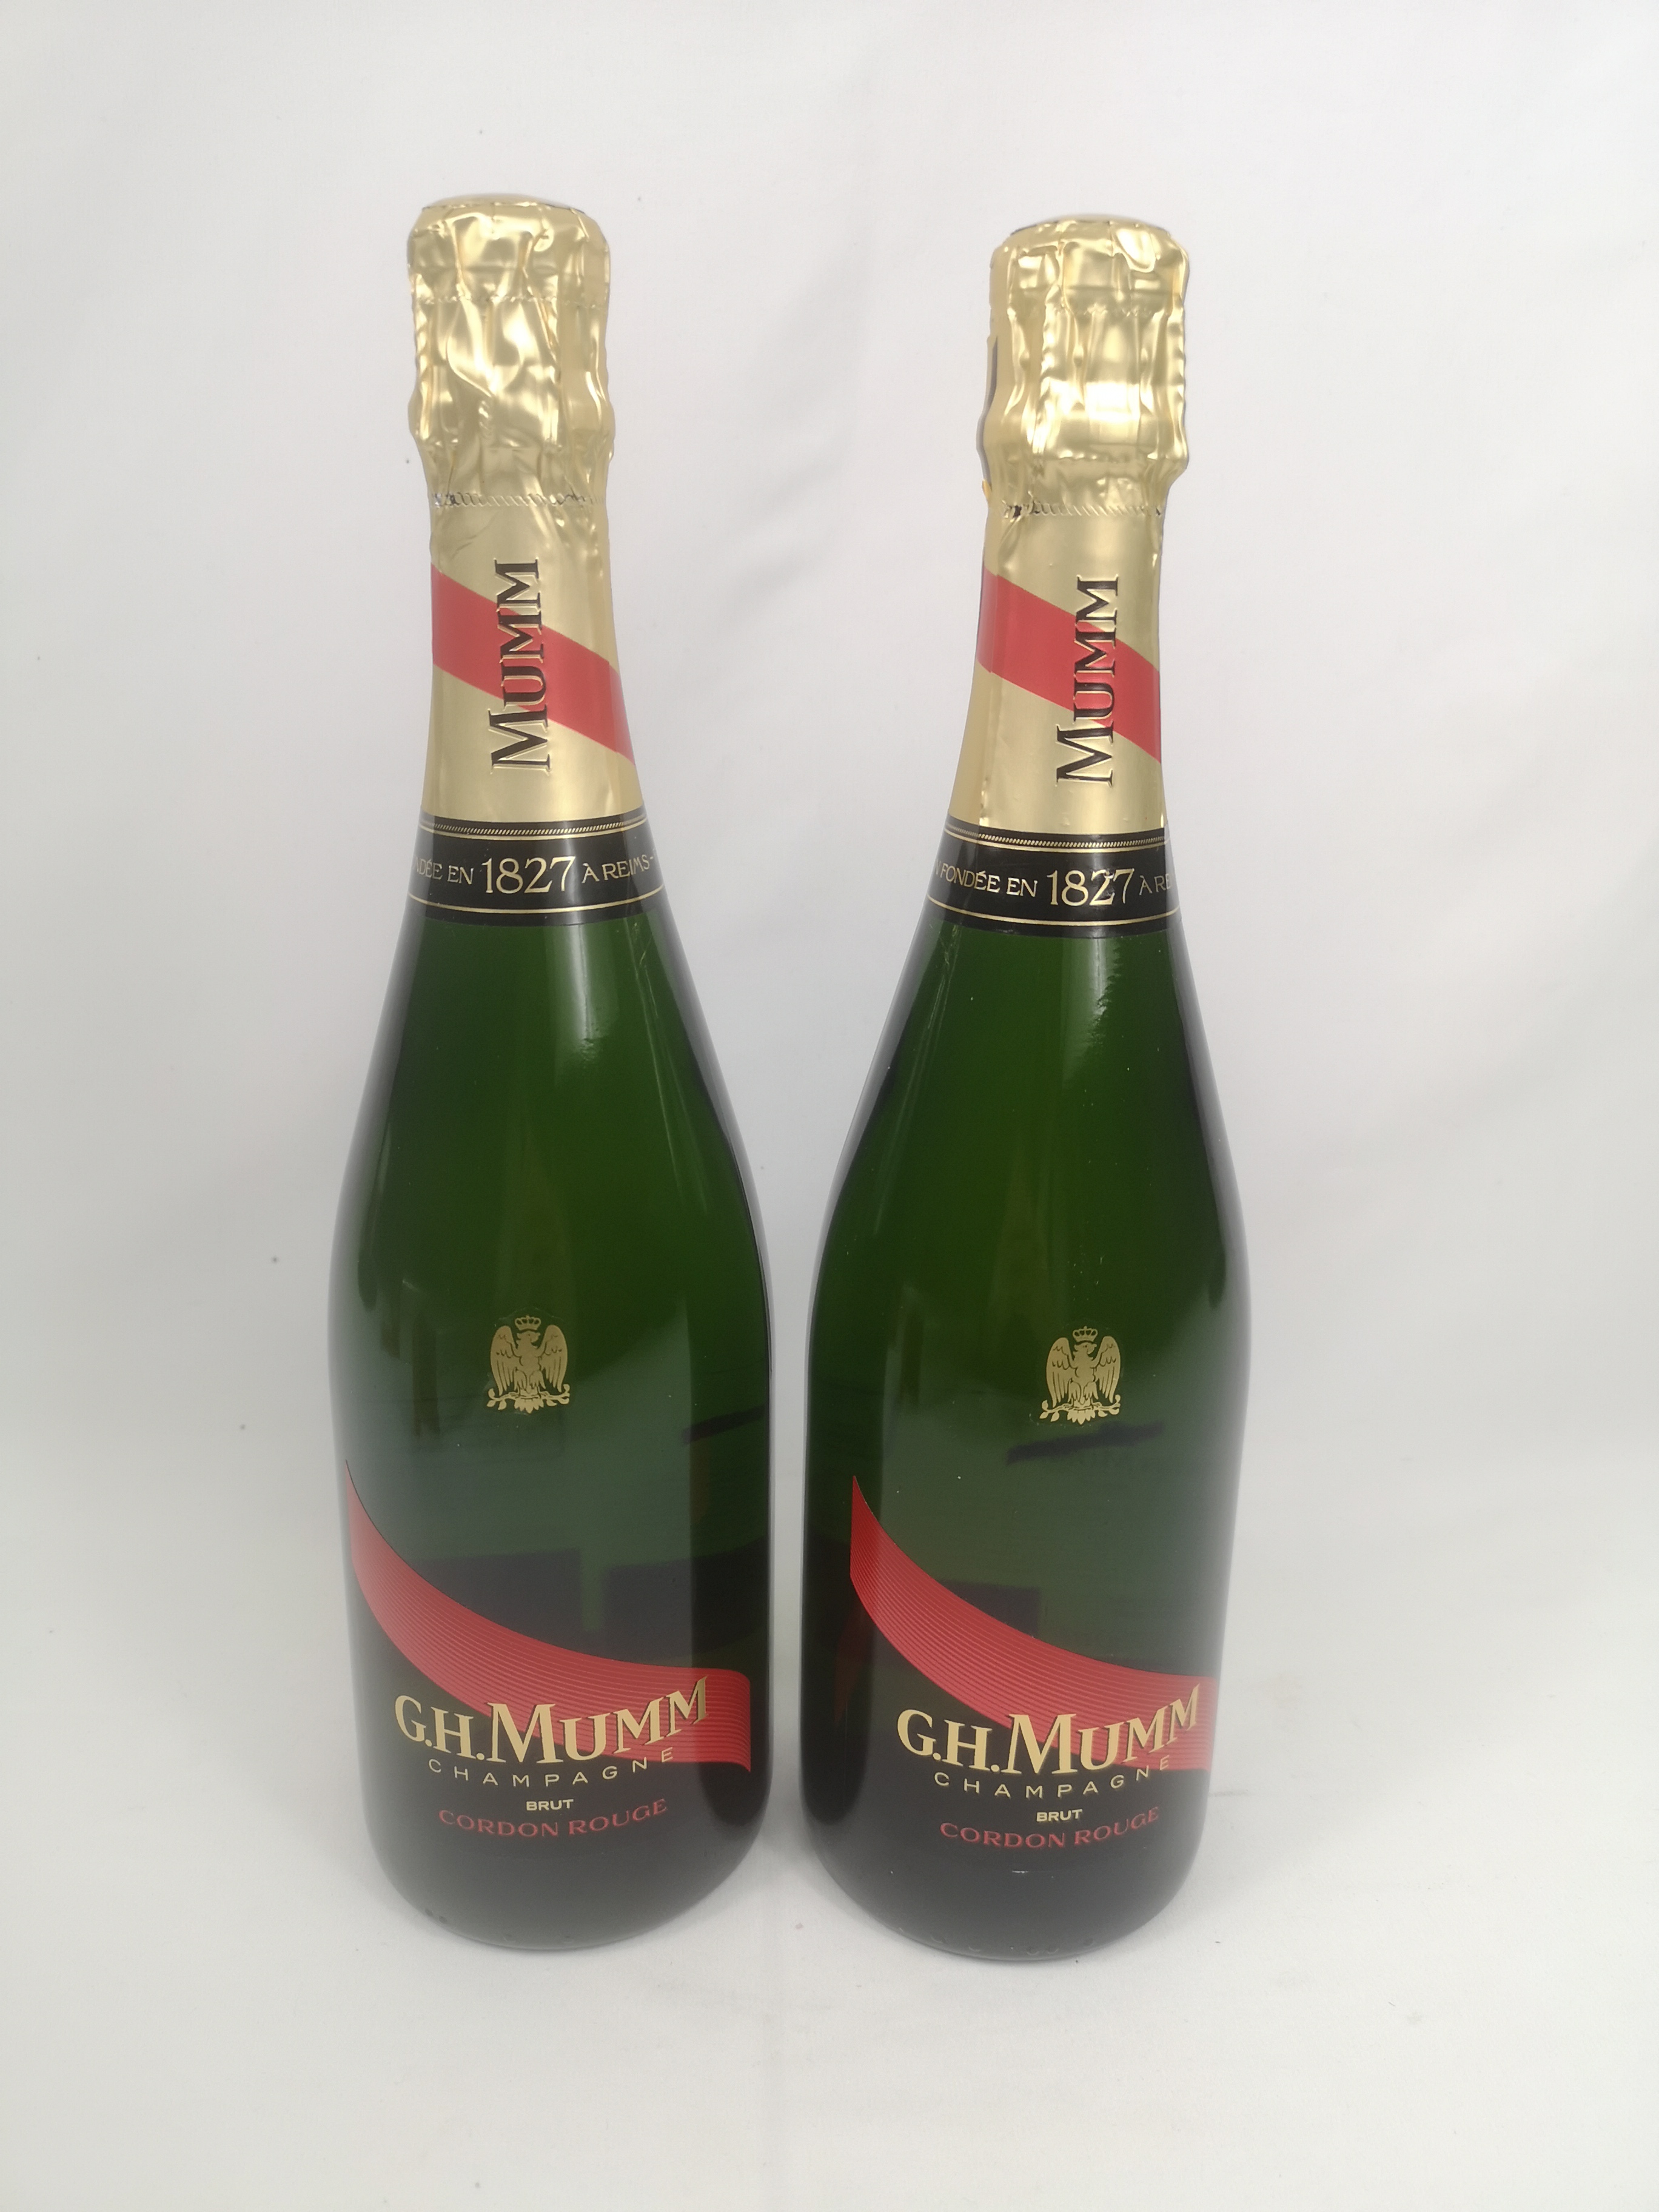 Two 75cl bottles of G.H. Mumm Brut Cordon Rouge champagne in boxes.